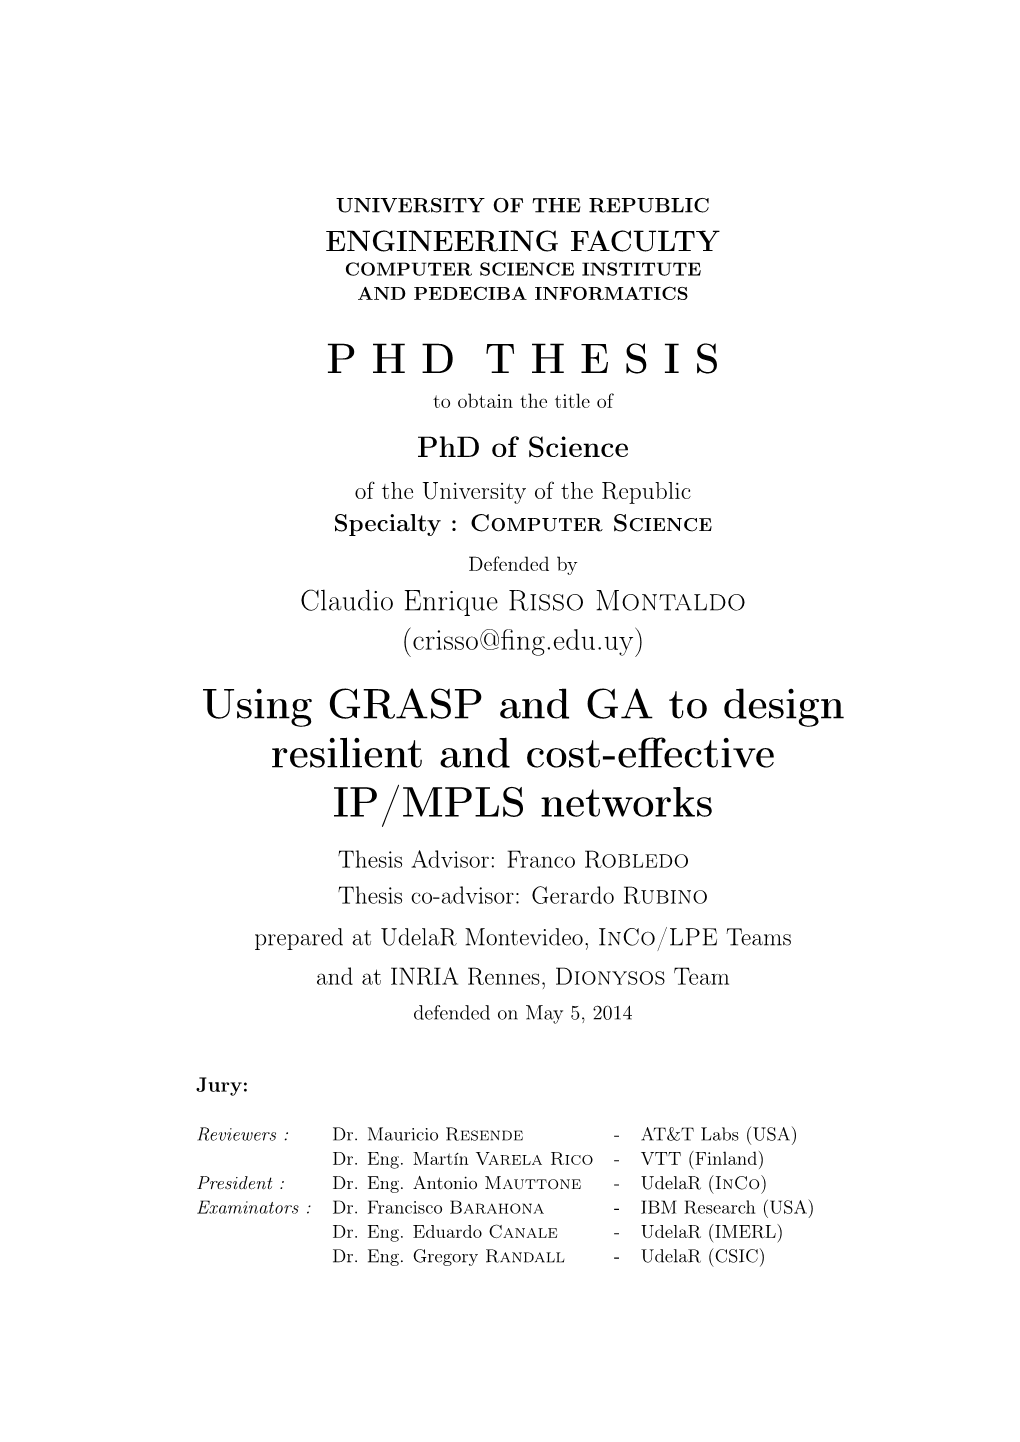 PHD THESIS Using GRASP and GA to Design Resilient and Cost-Effective IP/MPLS Networks